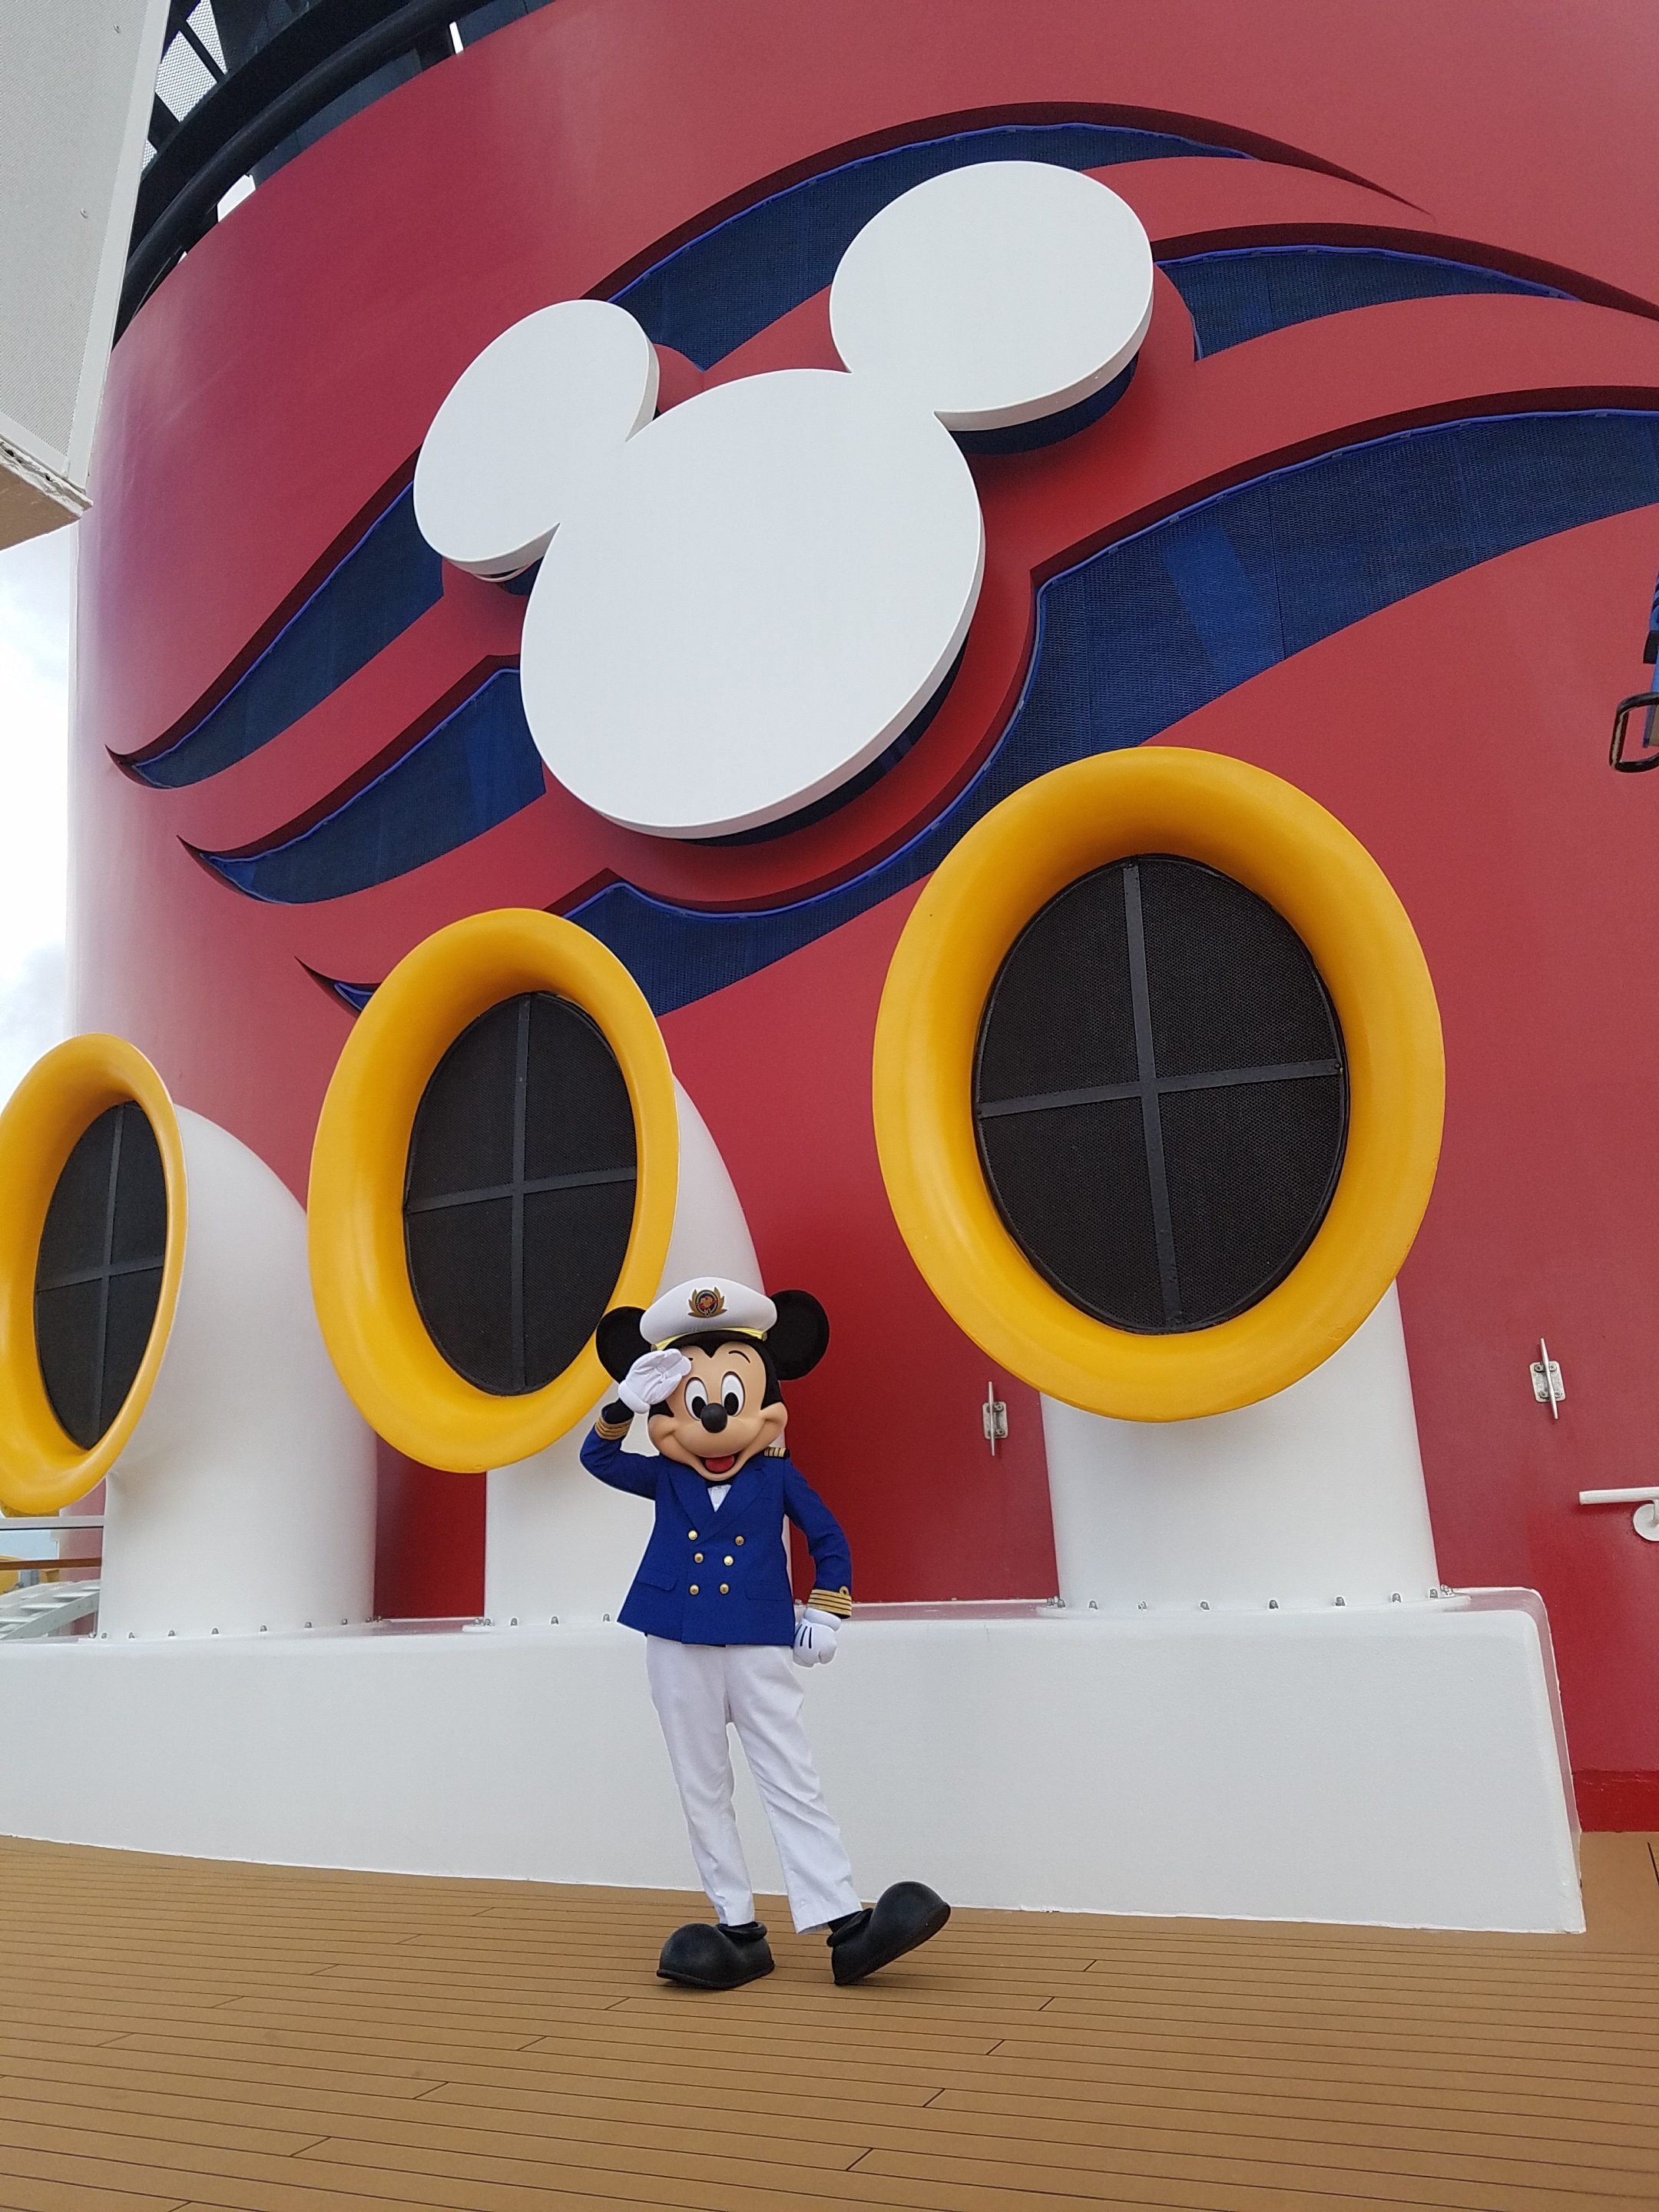 Mickey Mouse as the captain of the Disney Wonder